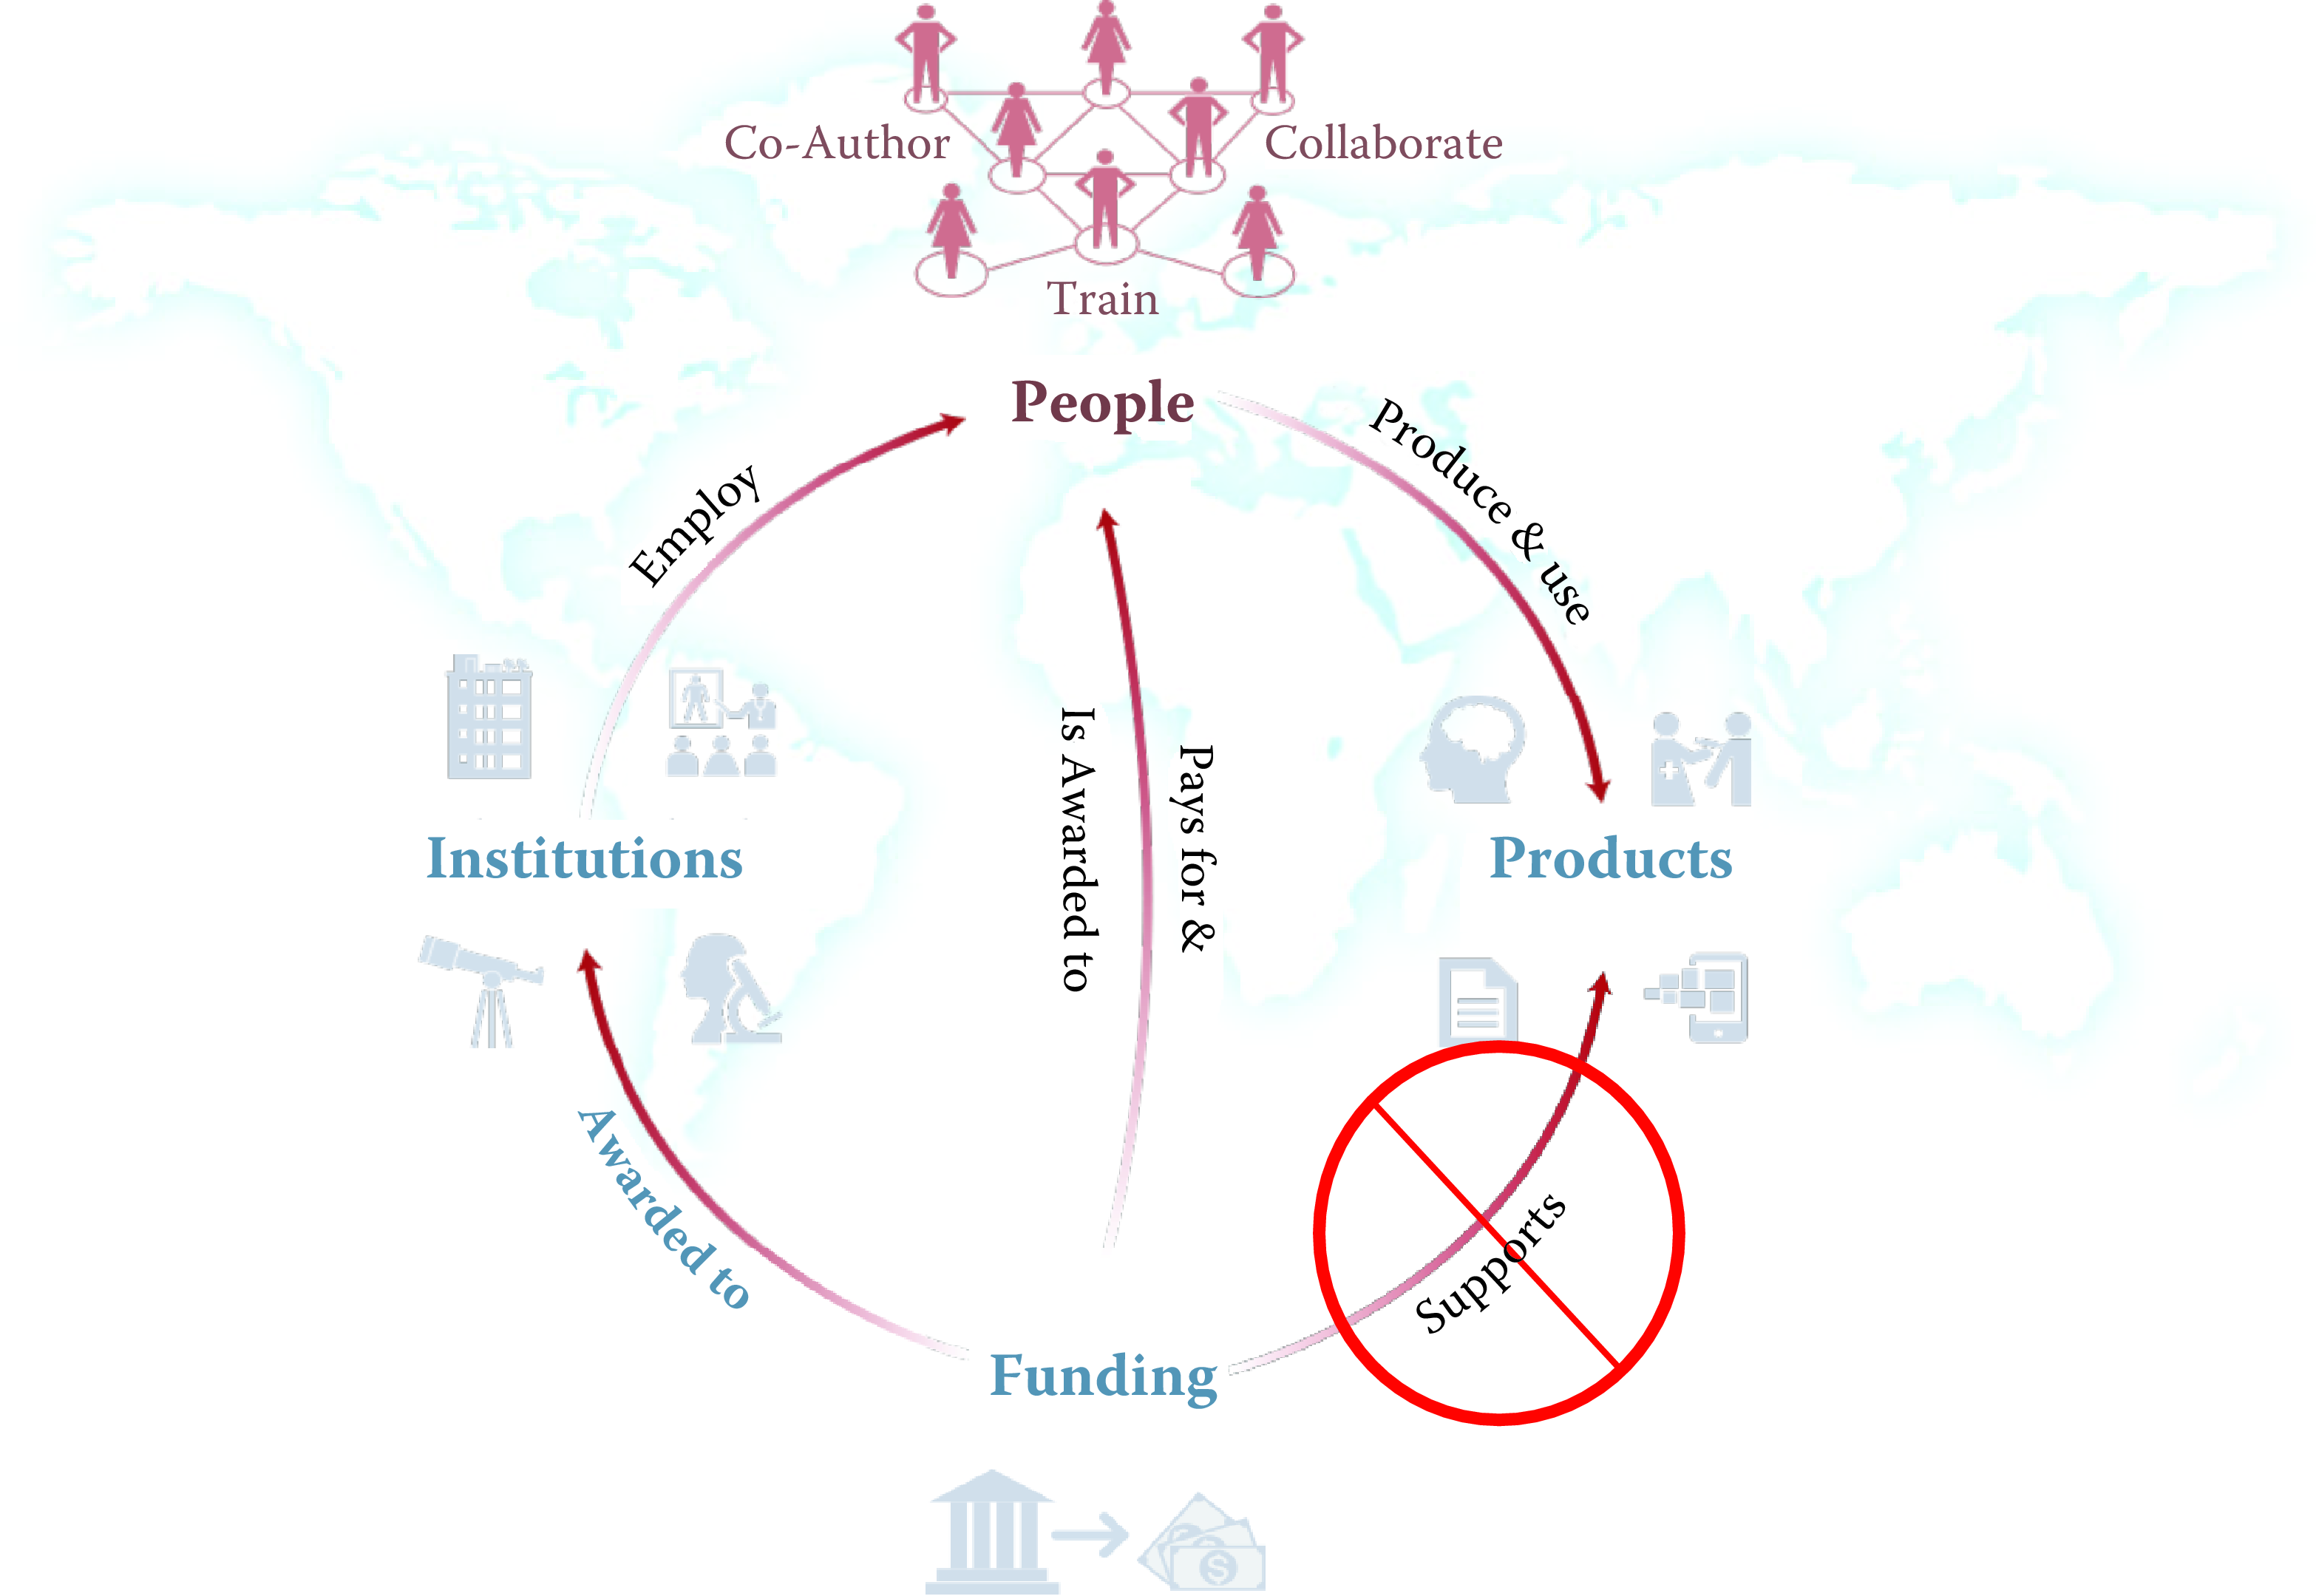 A visualization of the complex links between what and who is funded, and the results; tracing the direct link between funding and results is misleading and wrong